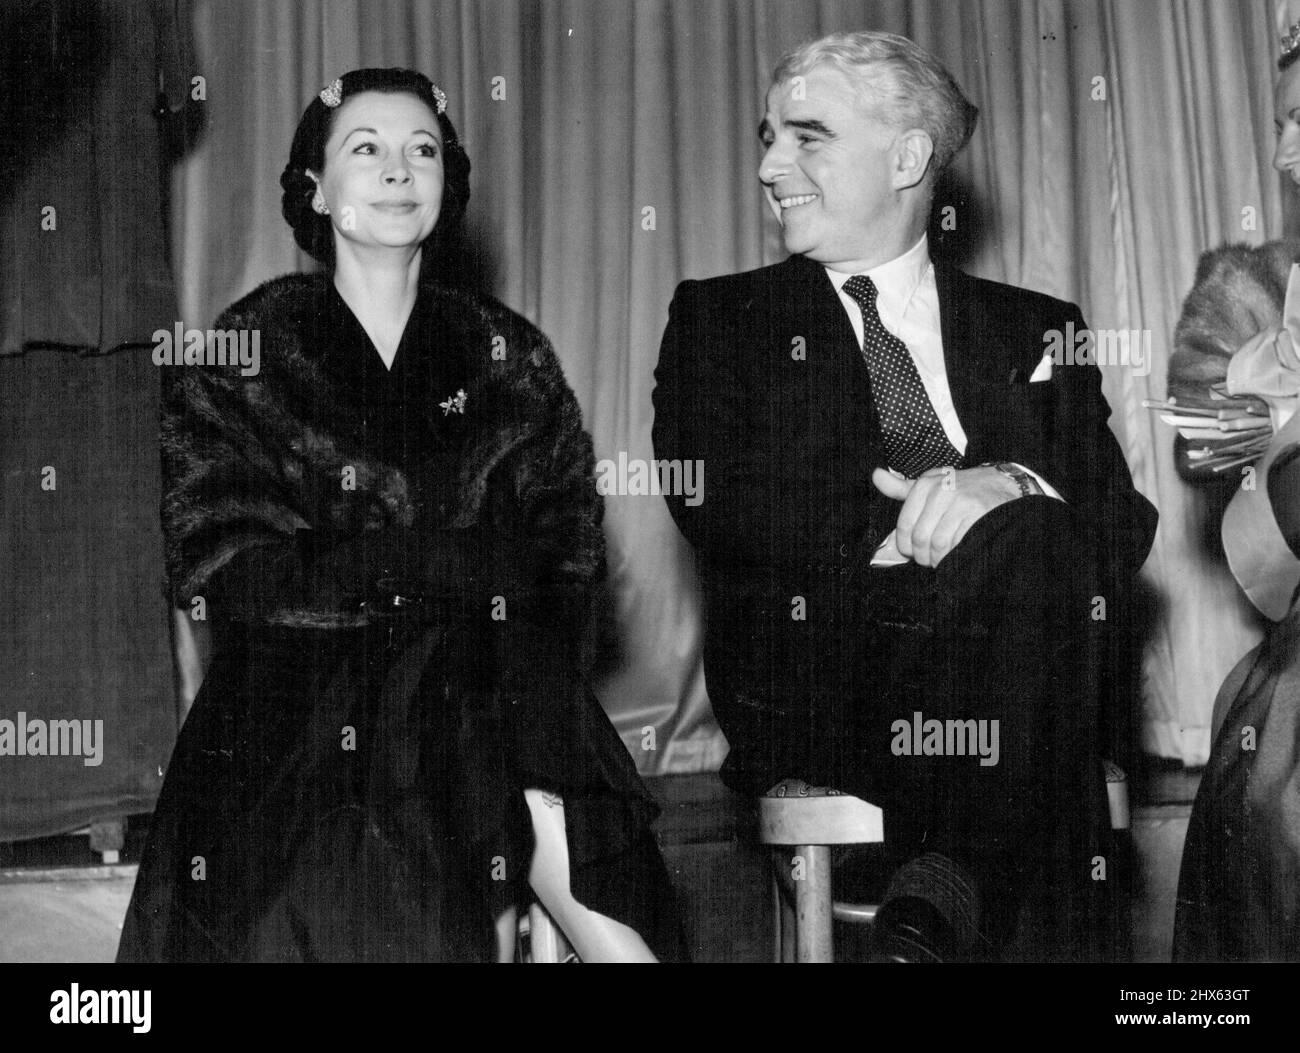 Party For The Names-In-Neon -- Seen talking together at the party, actor Emlyn Williams and Lady Olivier (actress Vivien Leigh). A big theatrical party was held in London, last night, by actor Emlyn Williams. Actress Vivien Leigh unveiled a plaque that will be the cover of the Souvenir brochure for the Midnight Cavalcade Gala, to be held at the London Palladium on March 18. It was designed by Cecil Beaton. The gala is in aid of the Actors Orphanage and Grand Order of Water Rats and the Jewish Na Stock Photo